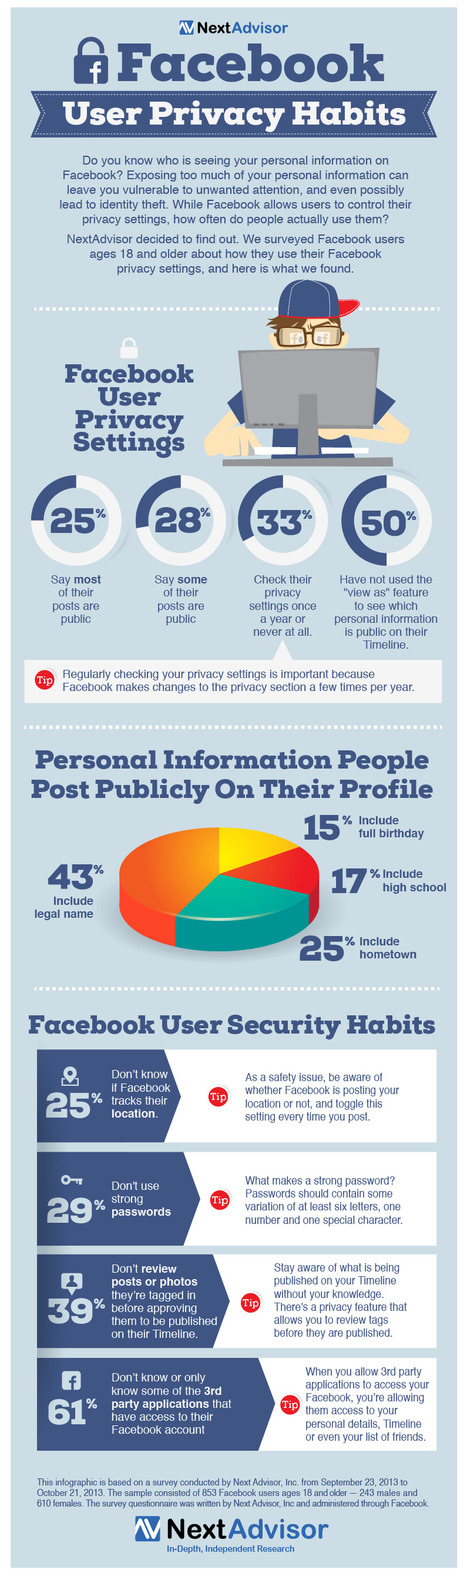 Facebook Privacy and User Habits [Infographic] | Techy Stuff | Scoop.it